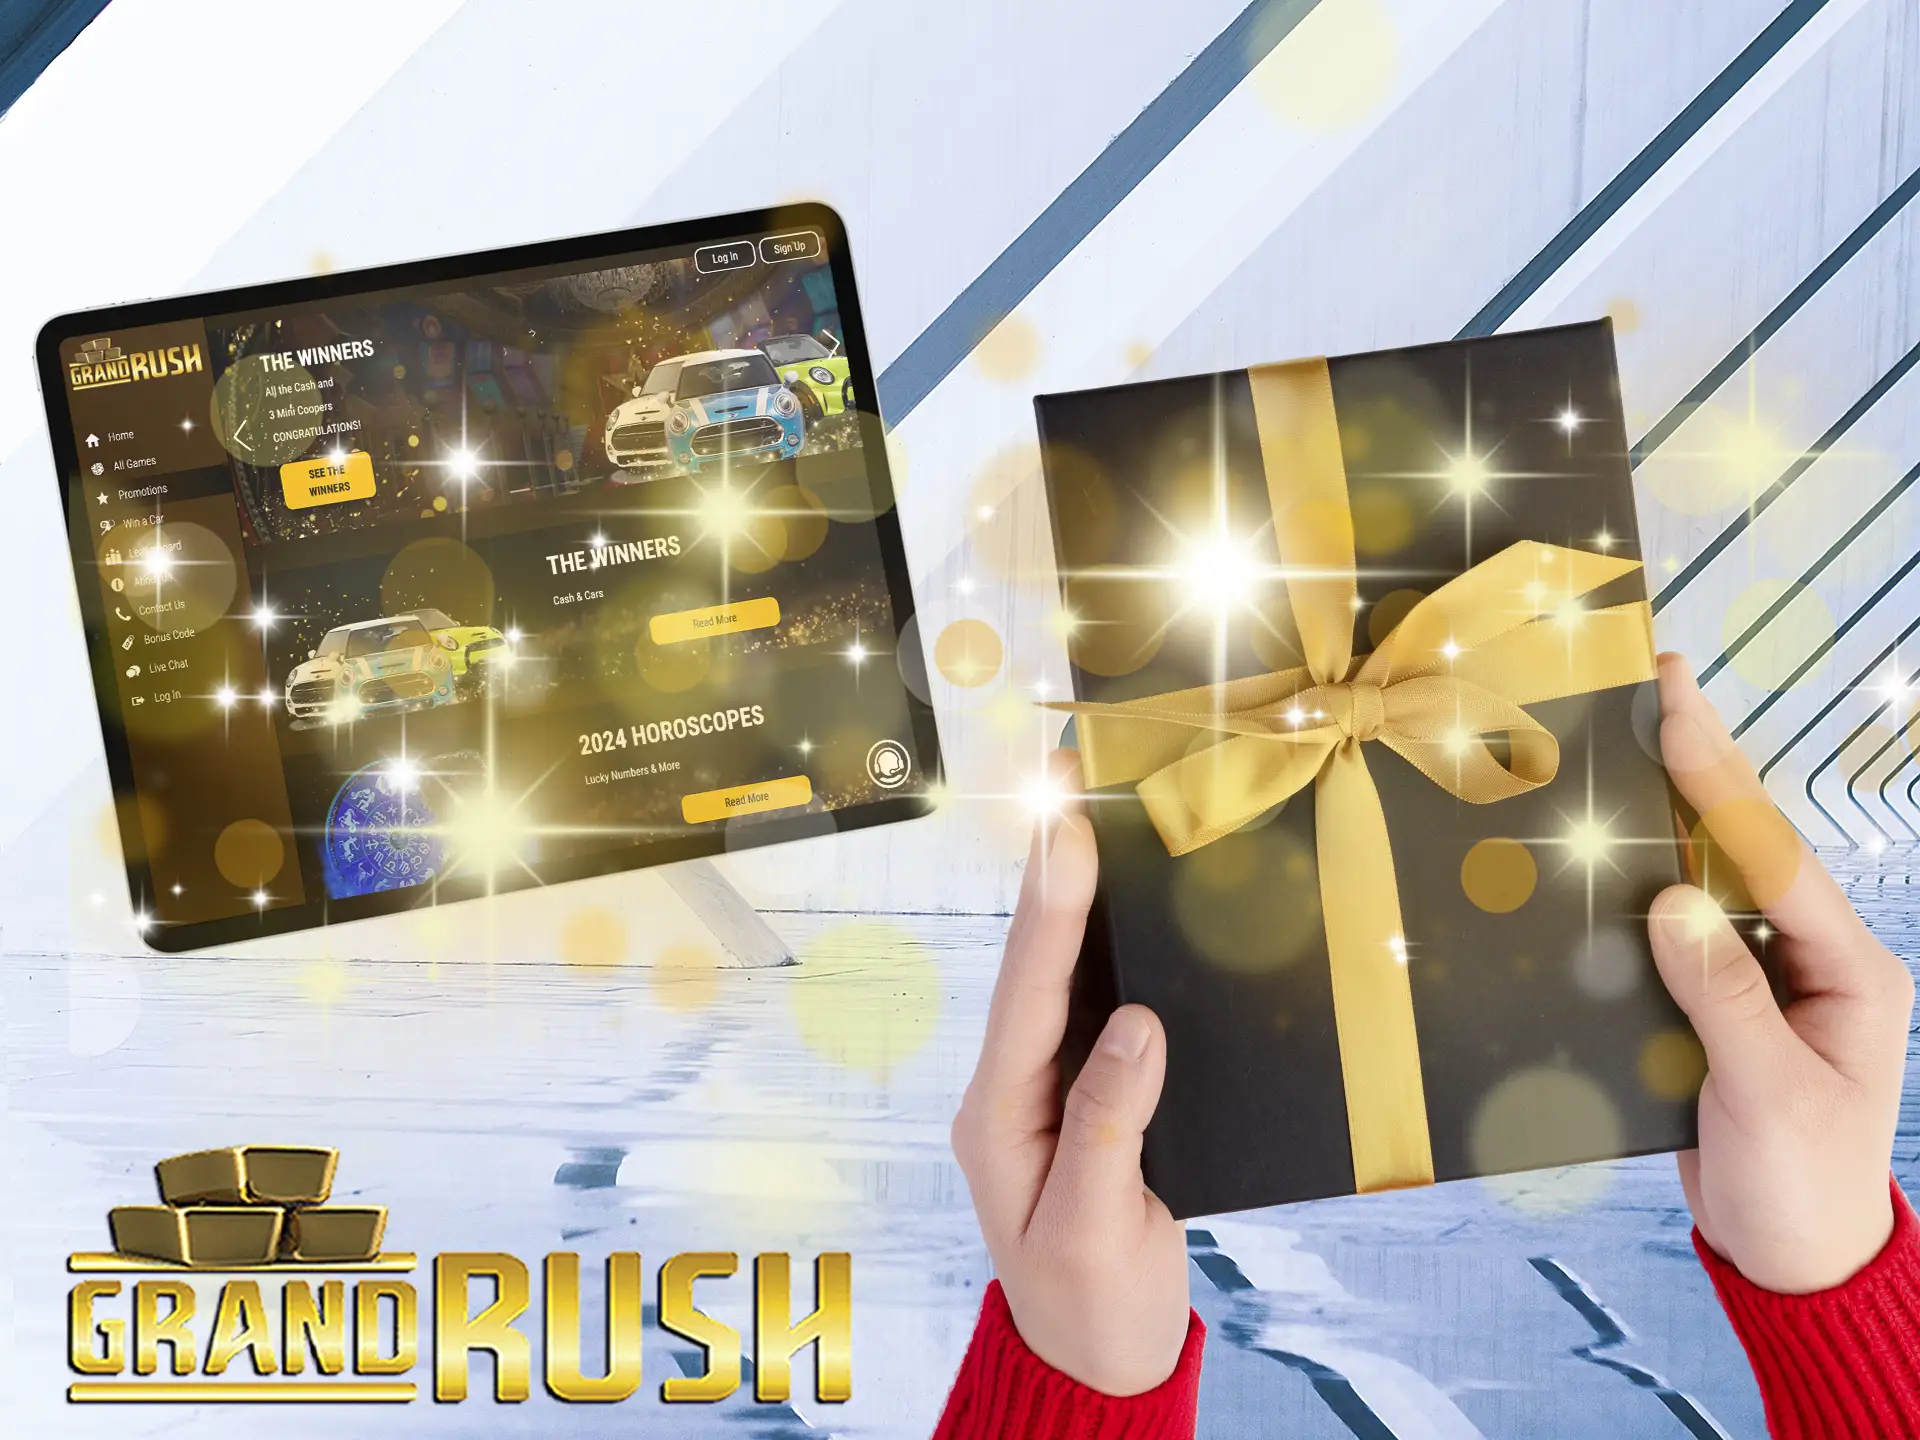 Register and make a first deposit to get the Grand Rush welcome bonus.